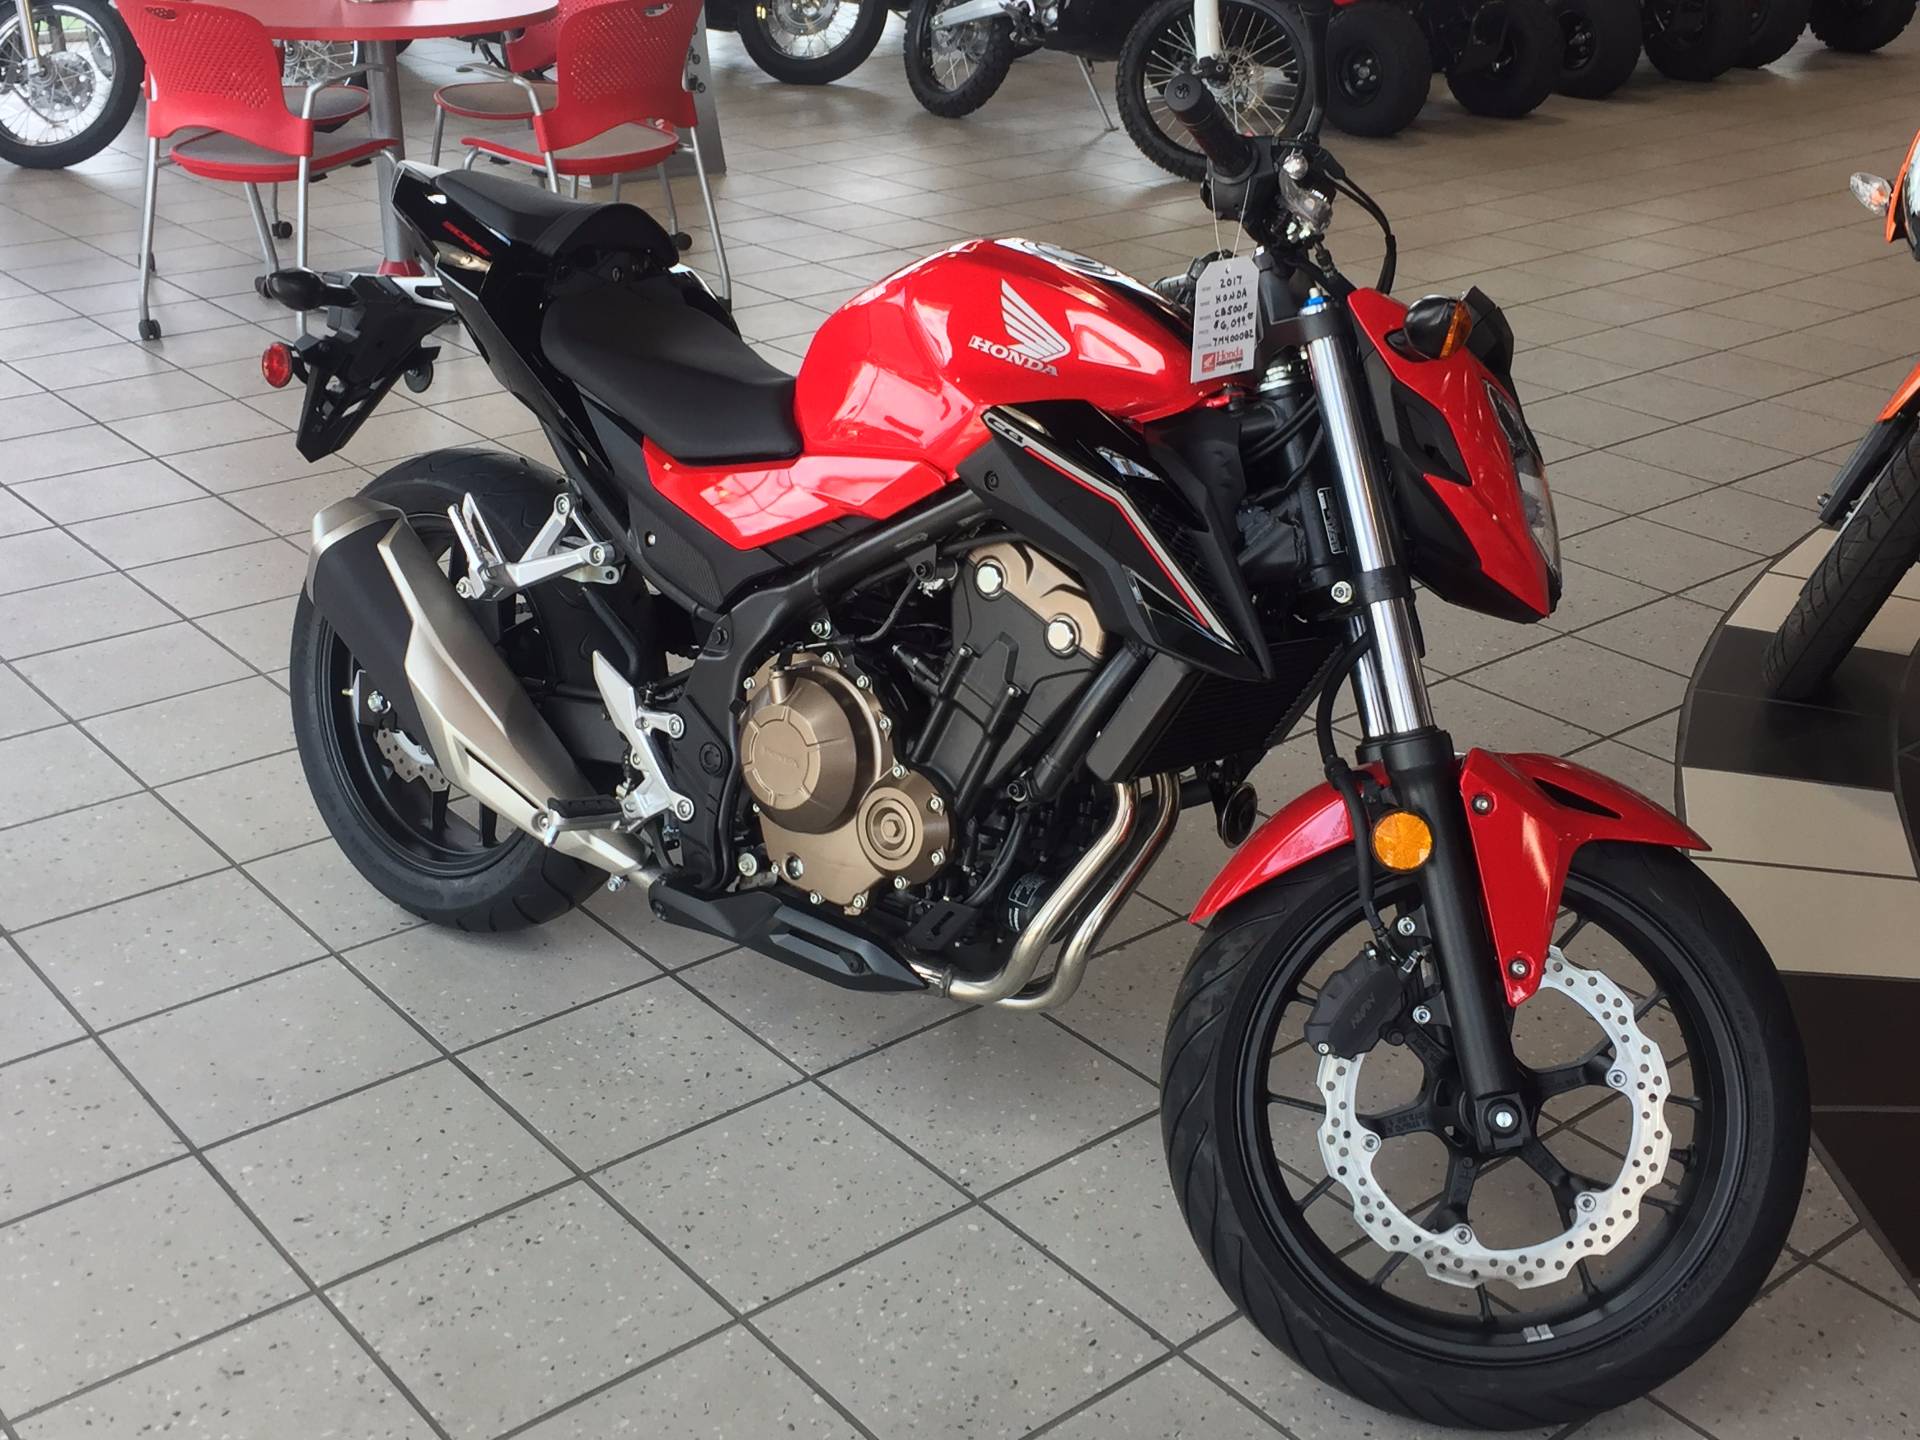 2017 Honda CB500F For Sale Troy, OH : 52952